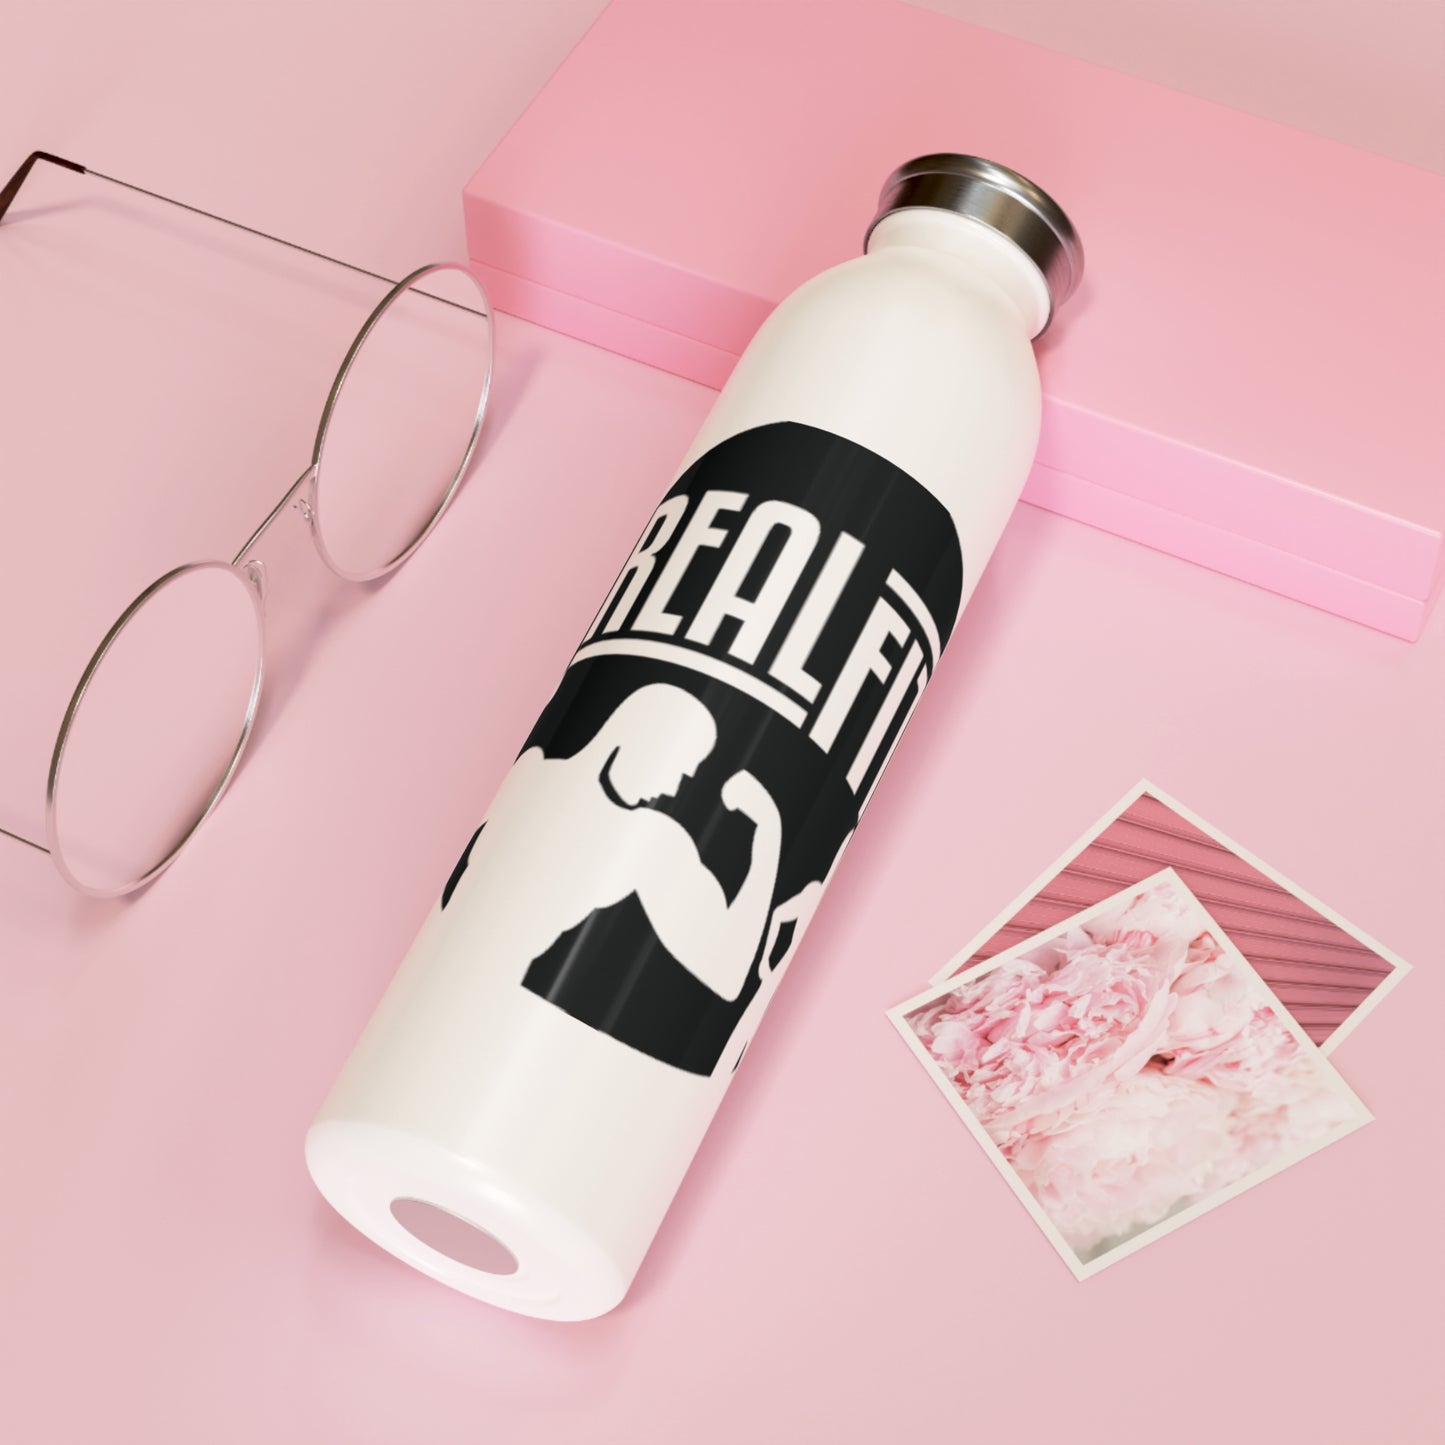 Real Fit Water Bottle